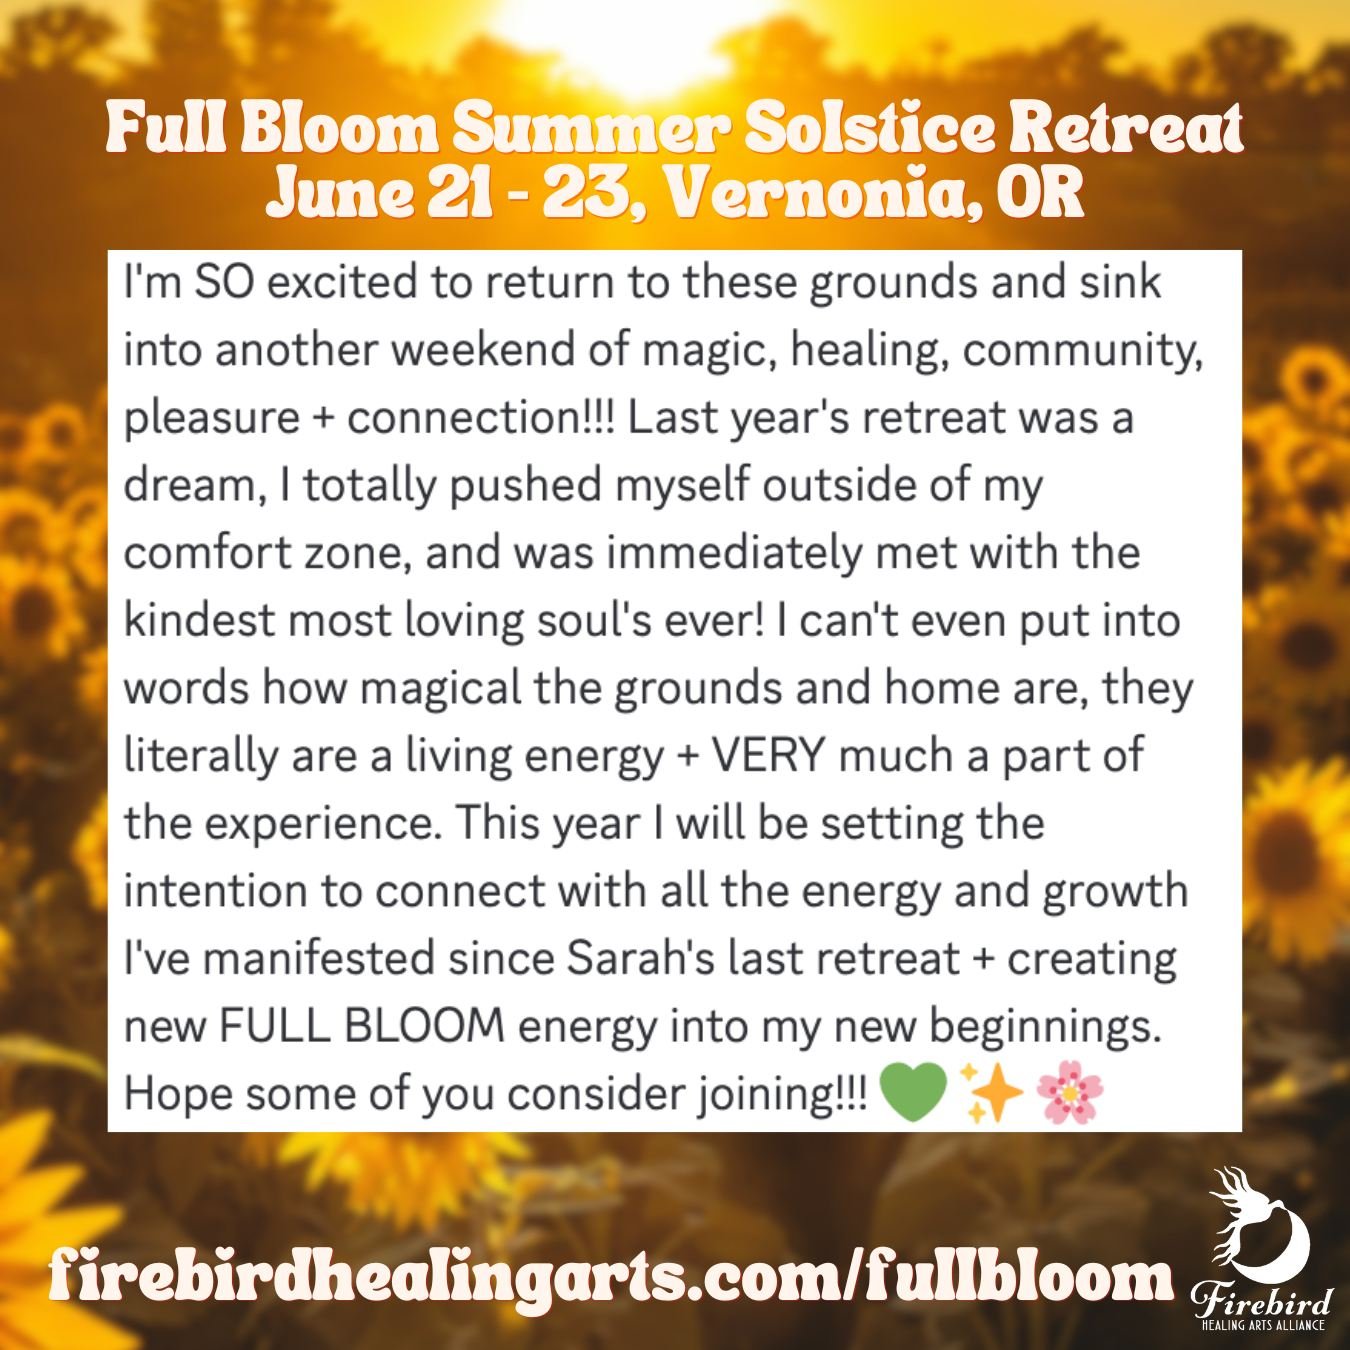 ☀️ Some sweet words from one of last year's retreat attendees who is joining again this year! 🥰

Fun fact: everyone who's currently signed up also joined for last year's Empress Retreat at this magical location! So clearly we are doing something rig